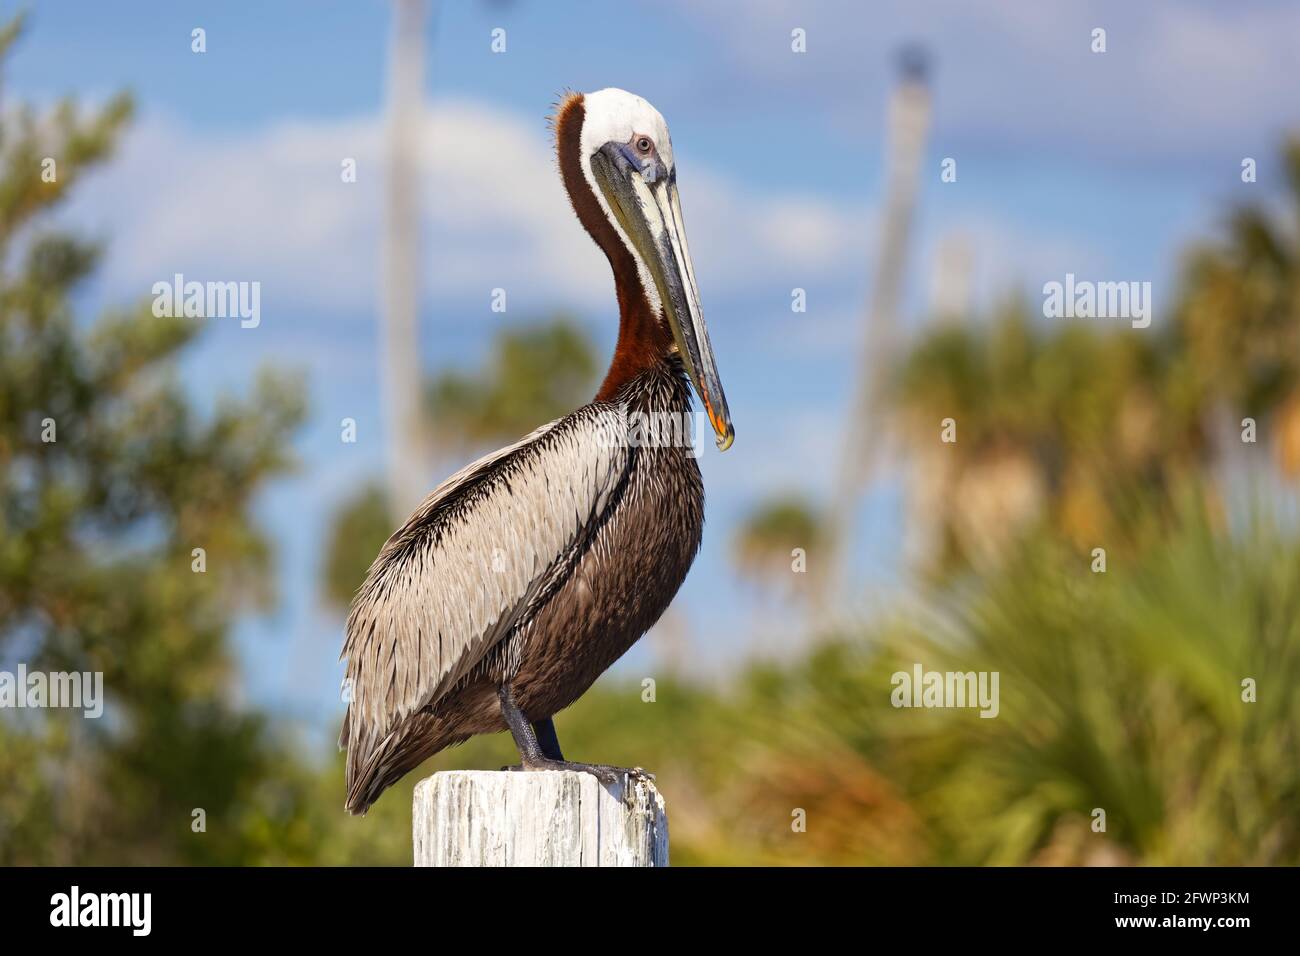 A beautiful adult Brown Pelican framed against a Florida sky, with trees gently blurred in the background. Stock Photo